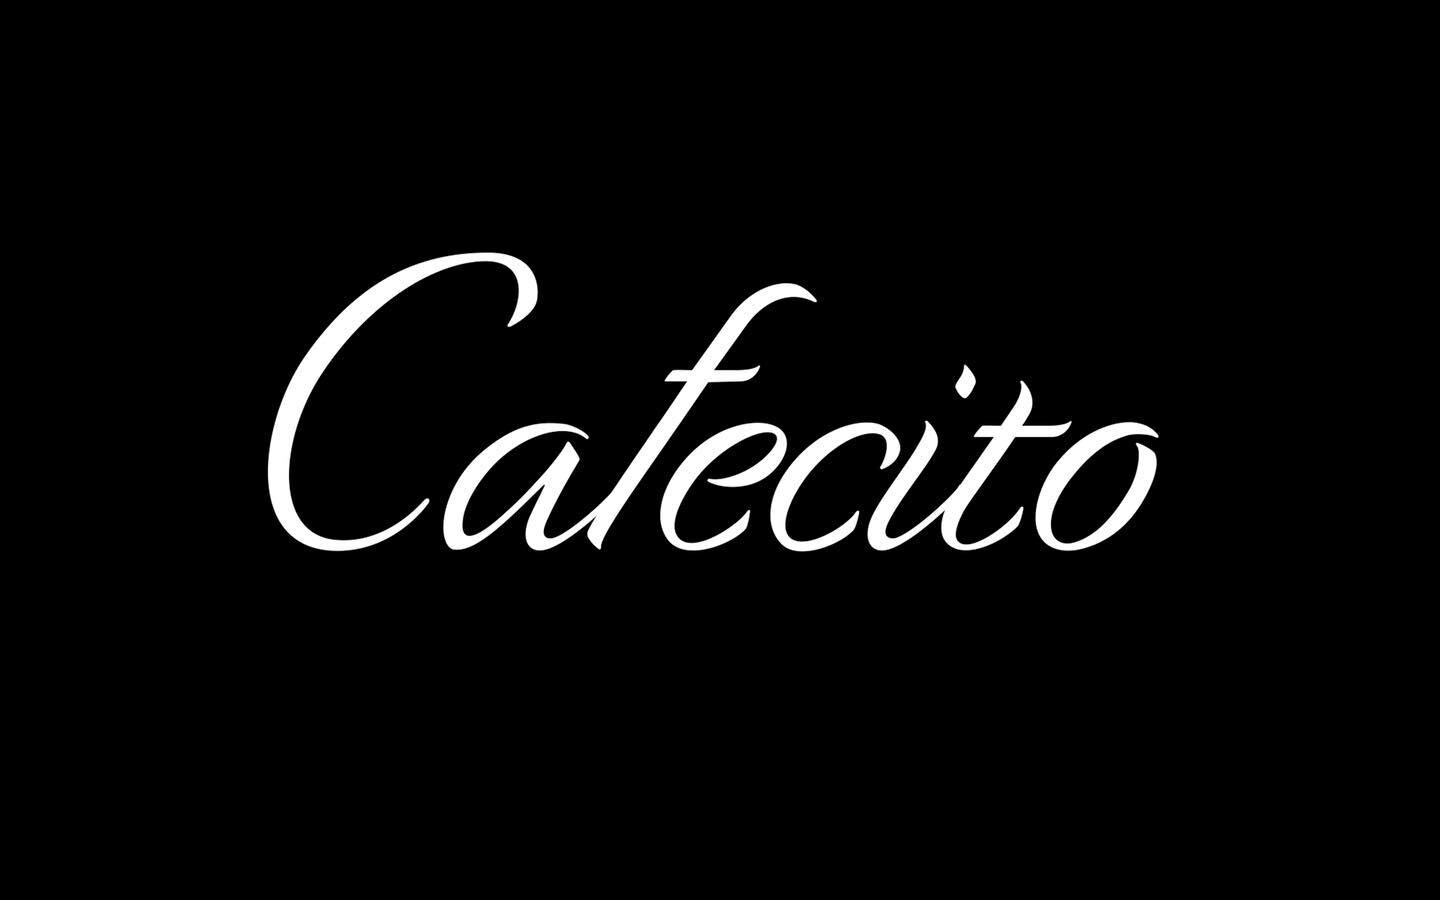 As #hispanicheritagemonth comes to a close, we are proud to release our first Visceral Vignette highlighting the importance of family traditions and heritage! Check out our new film, Cafecito, on YouTube! 

Cafecito is a small vignette showcasing the